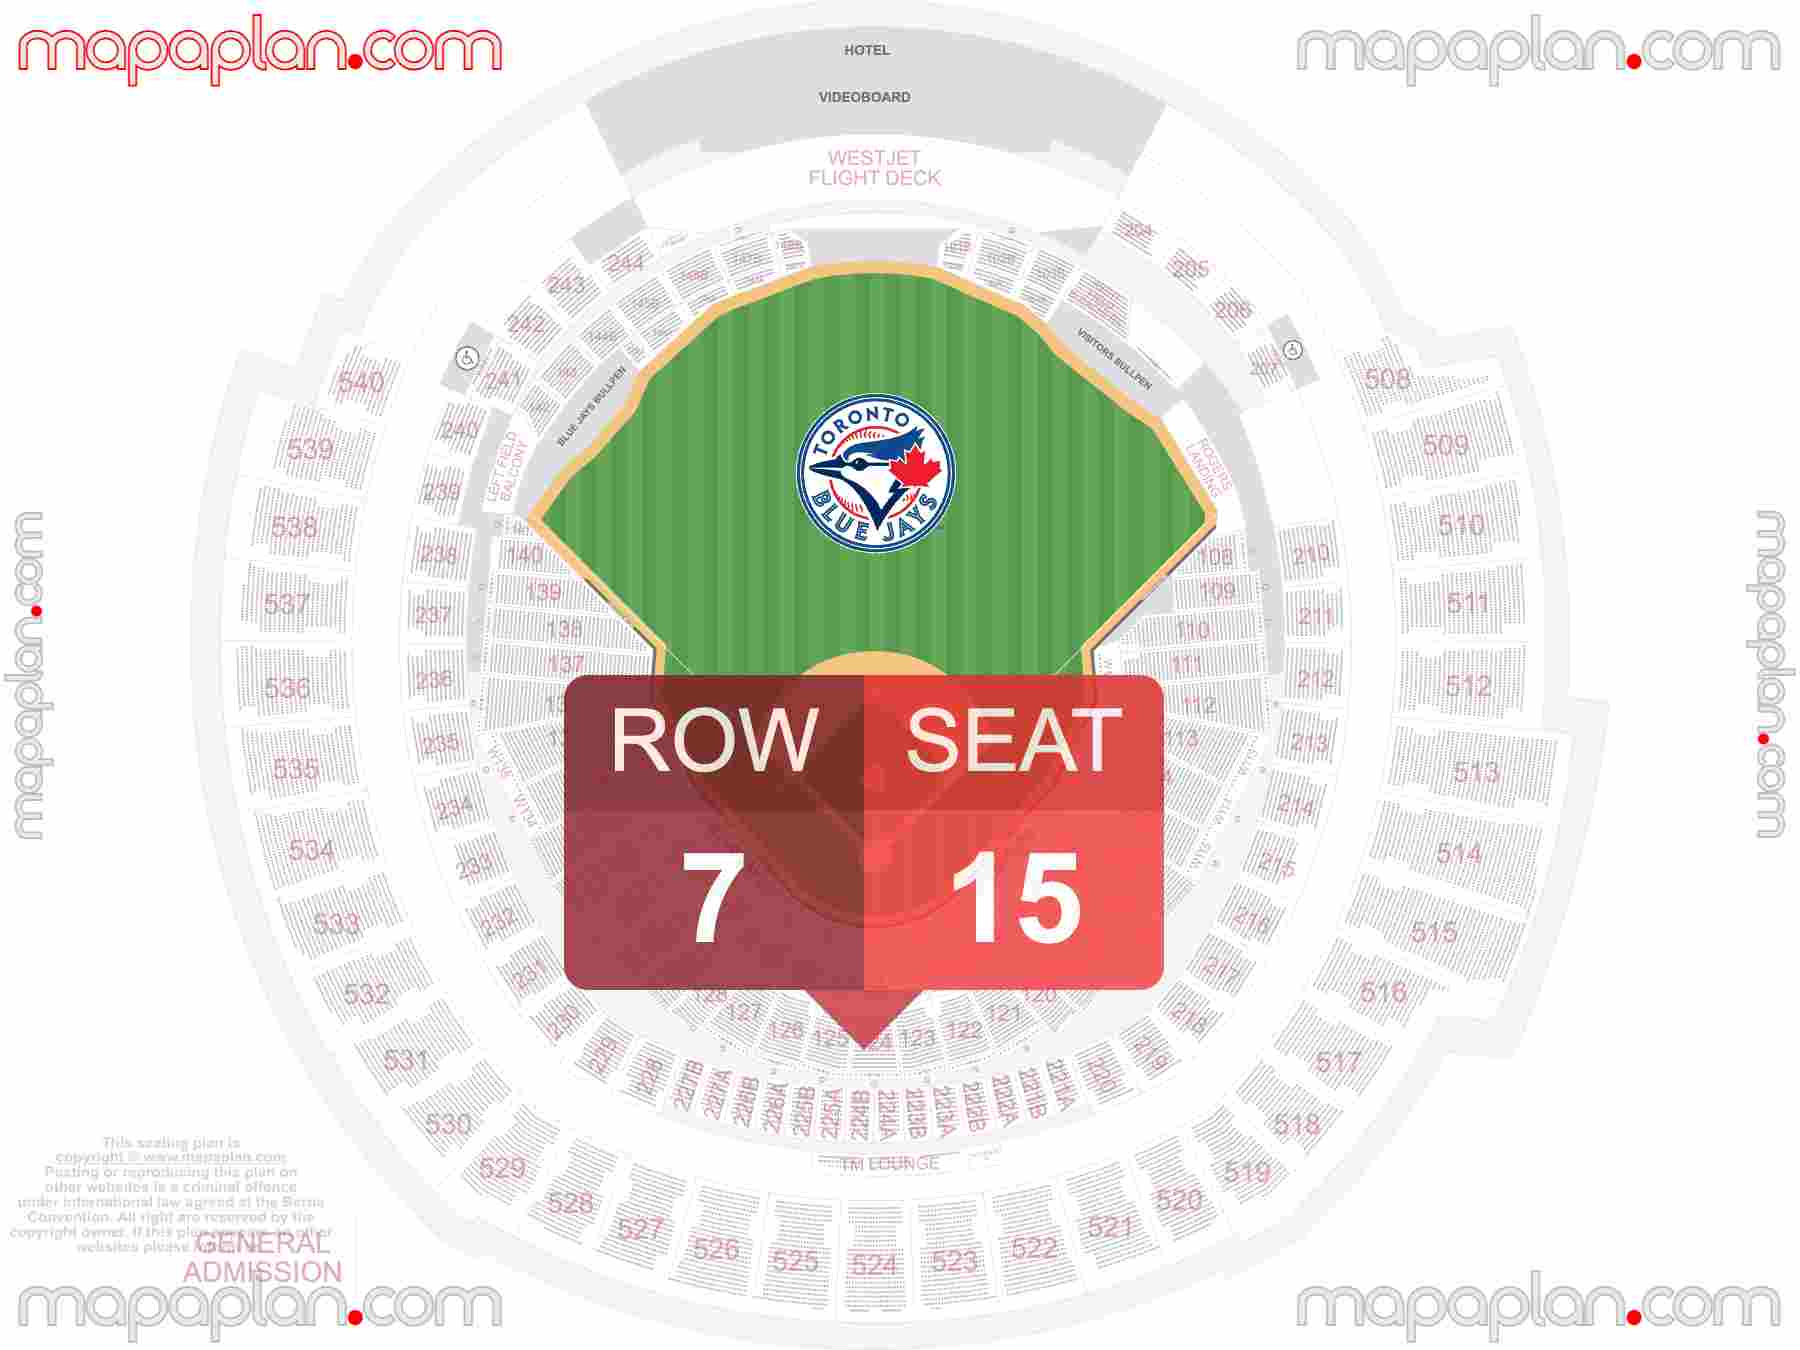 Toronto Rogers Centre seating map Toronto Blue Jays baseball inside capacity view arrangement chart - Interactive virtual 3d best seats & rows detailed stadium image configuration layout